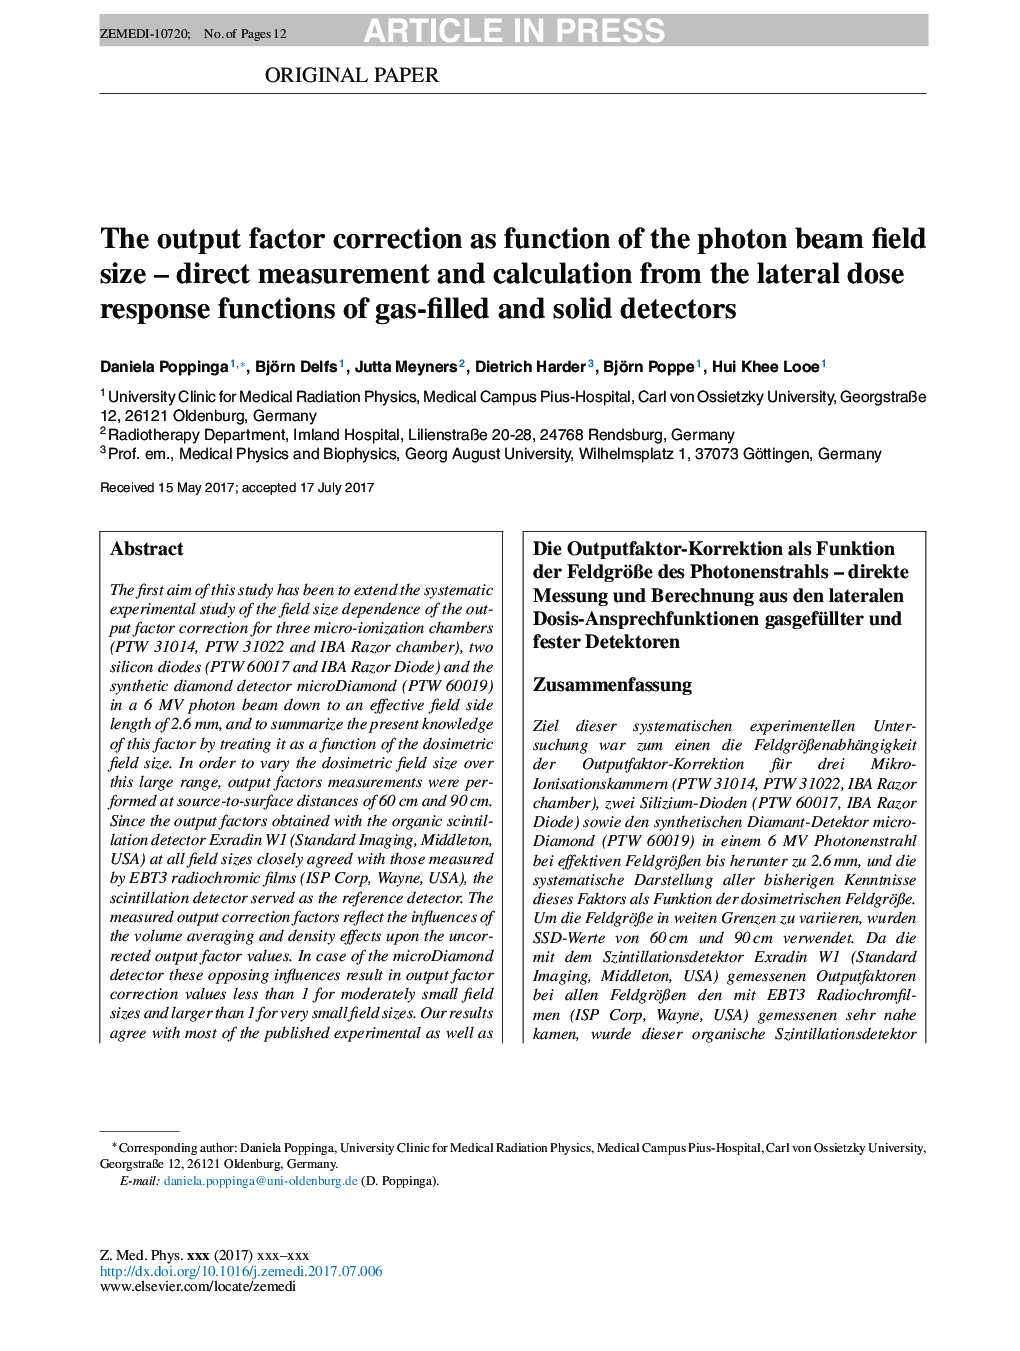 The output factor correction as function of the photon beam field size - direct measurement and calculation from the lateral dose response functions of gas-filled and solid detectors